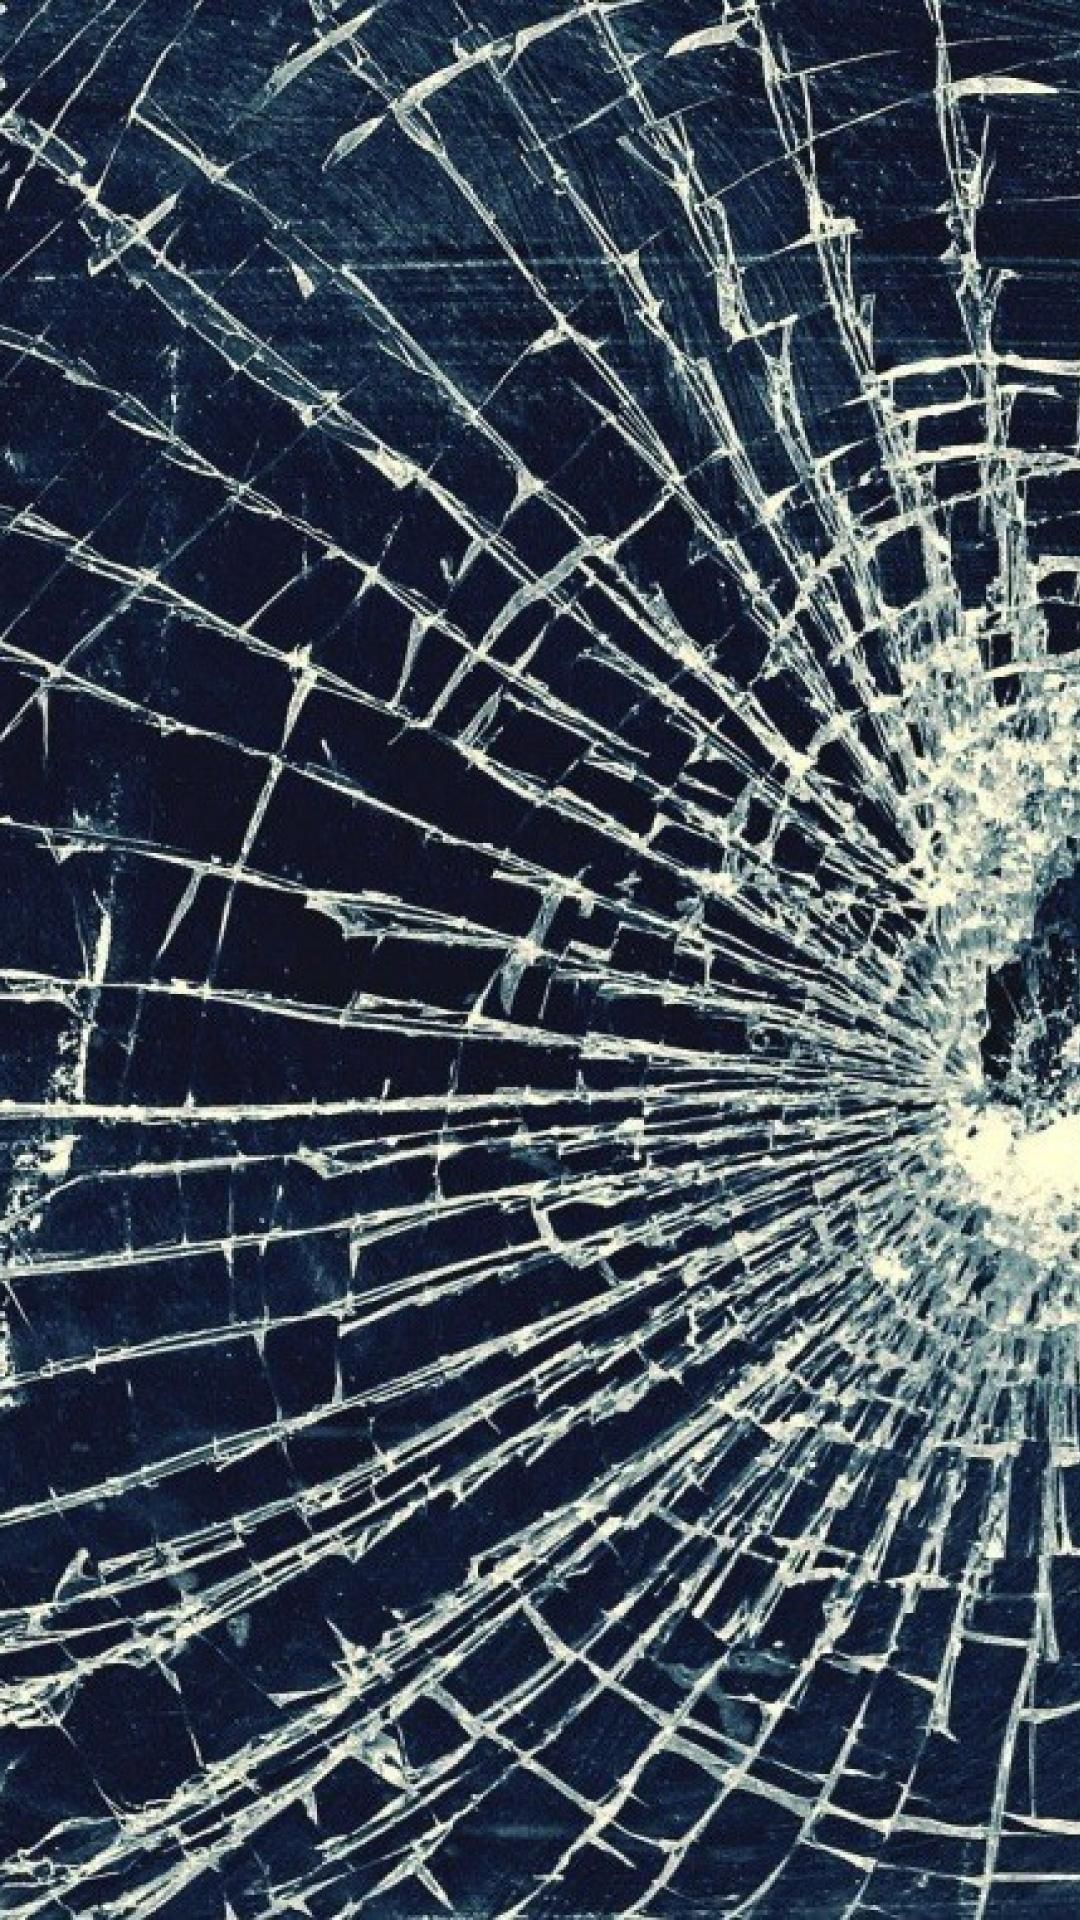 Realistic Cracked Screen Background Picture. Broken